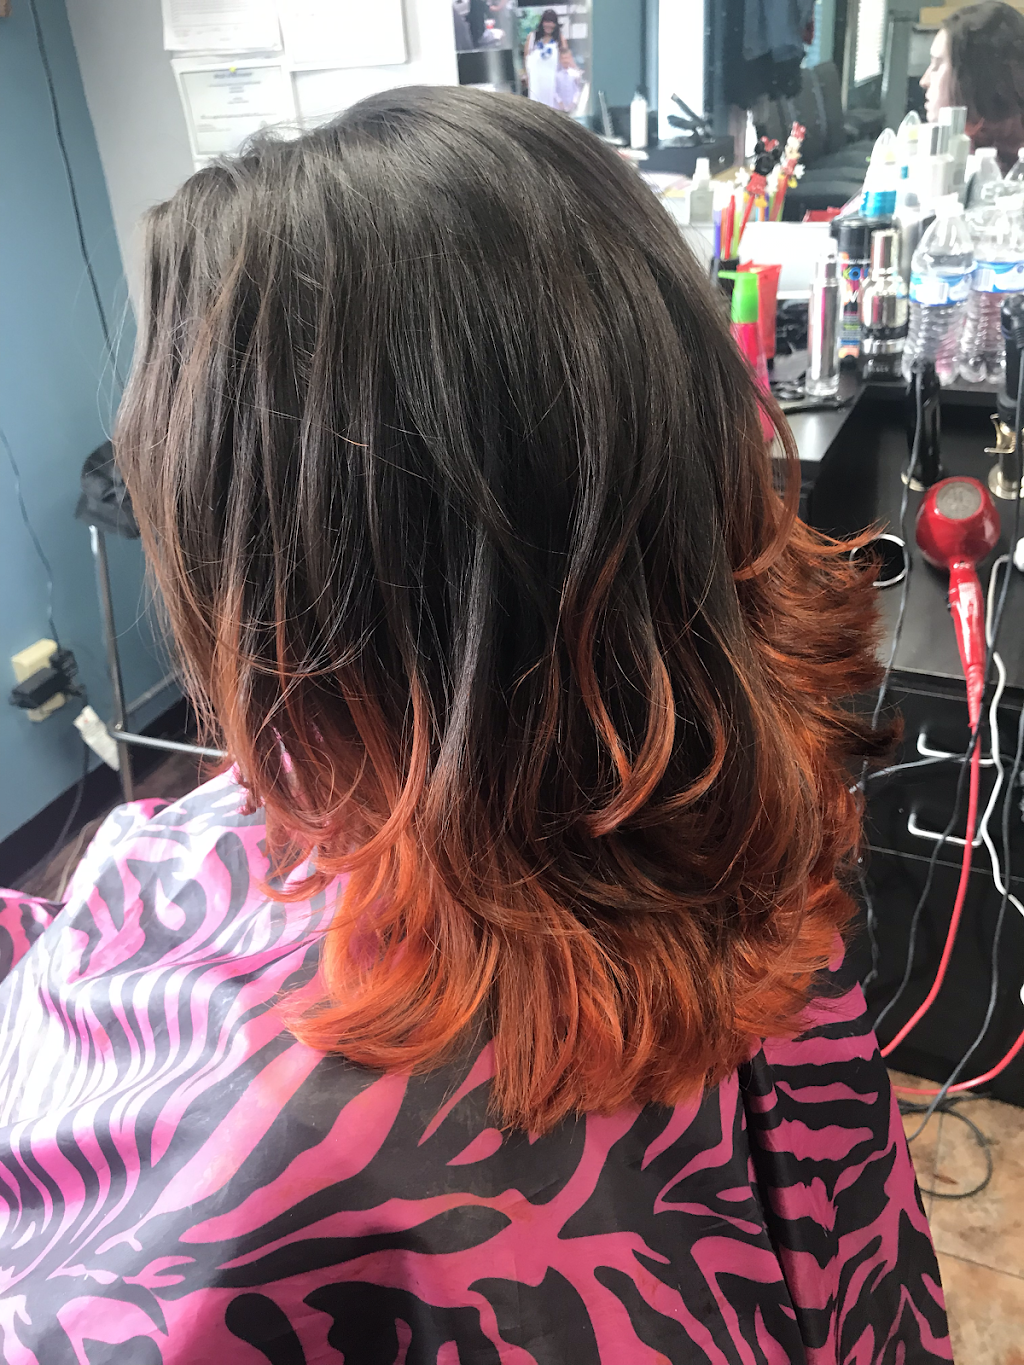 Hair by Design | 4826 Old Hickory Blvd, Hermitage, TN 37076 | Phone: (615) 885-5055